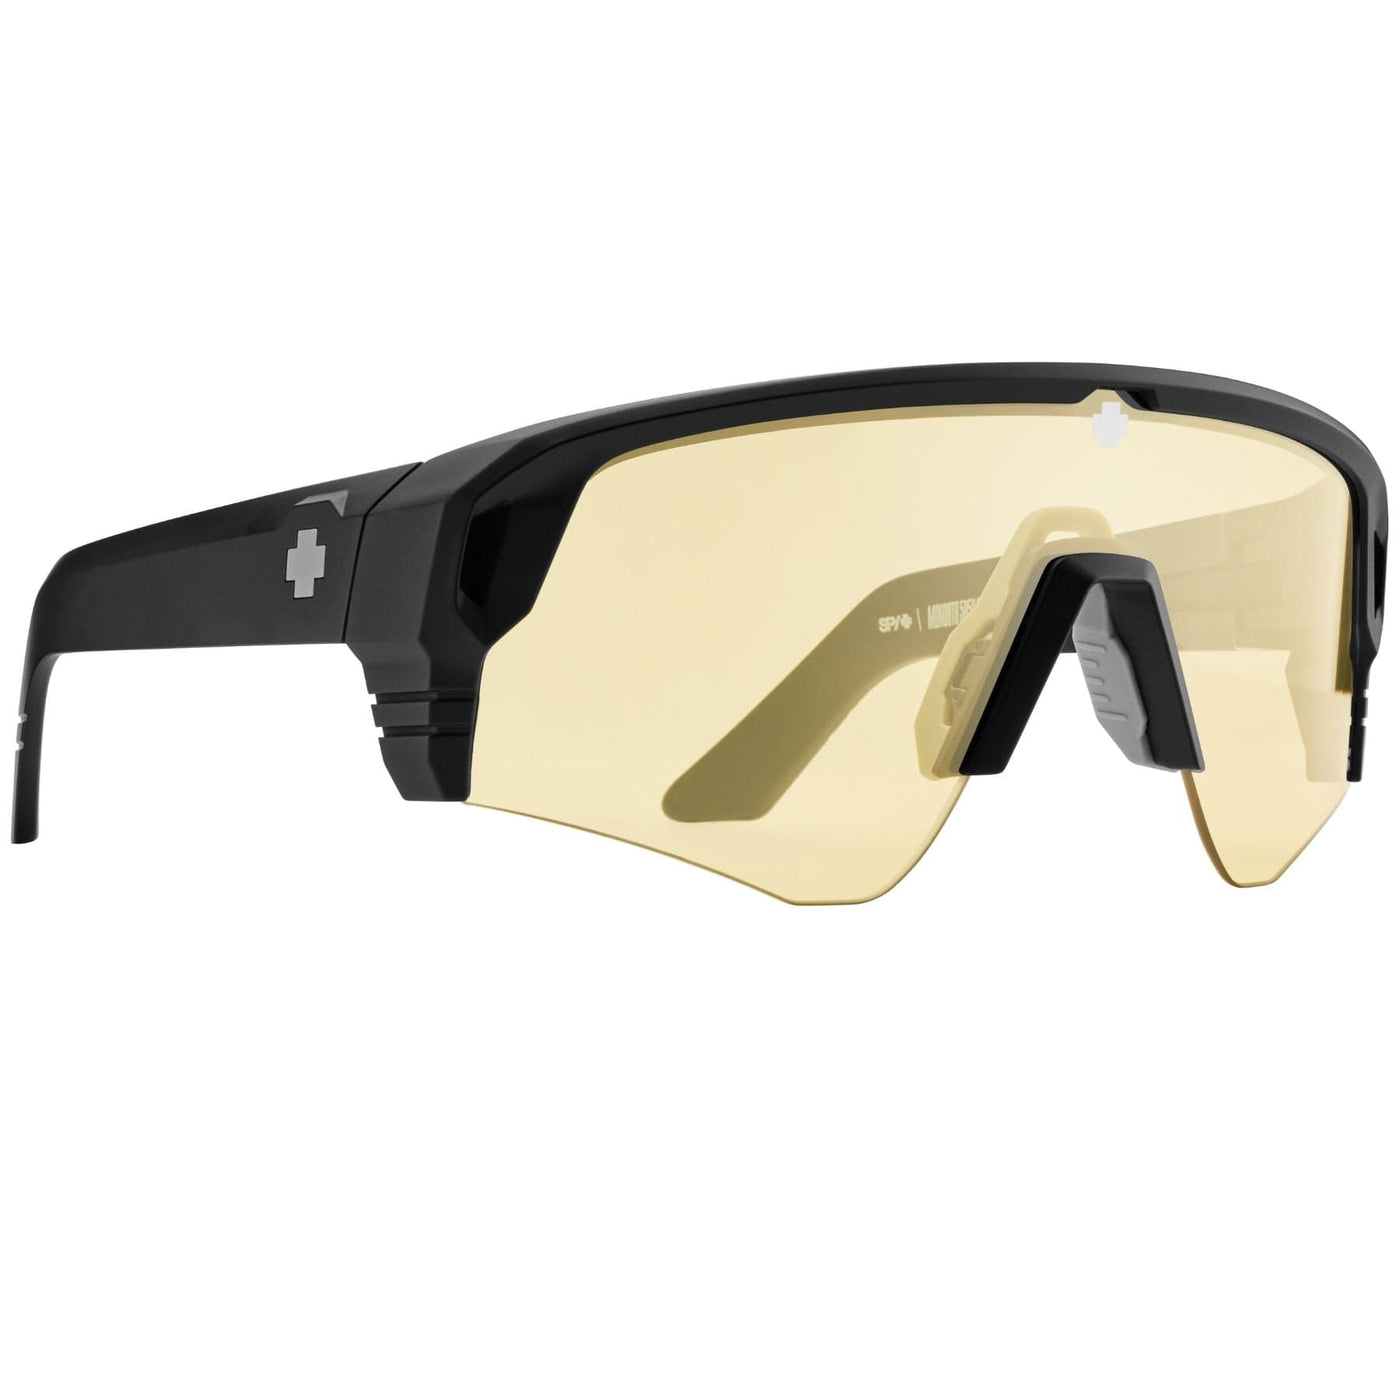 MONOLITH SPEED Sunglasses, Happy Lens - Light Yellow 8Lines Shop - Fast Shipping